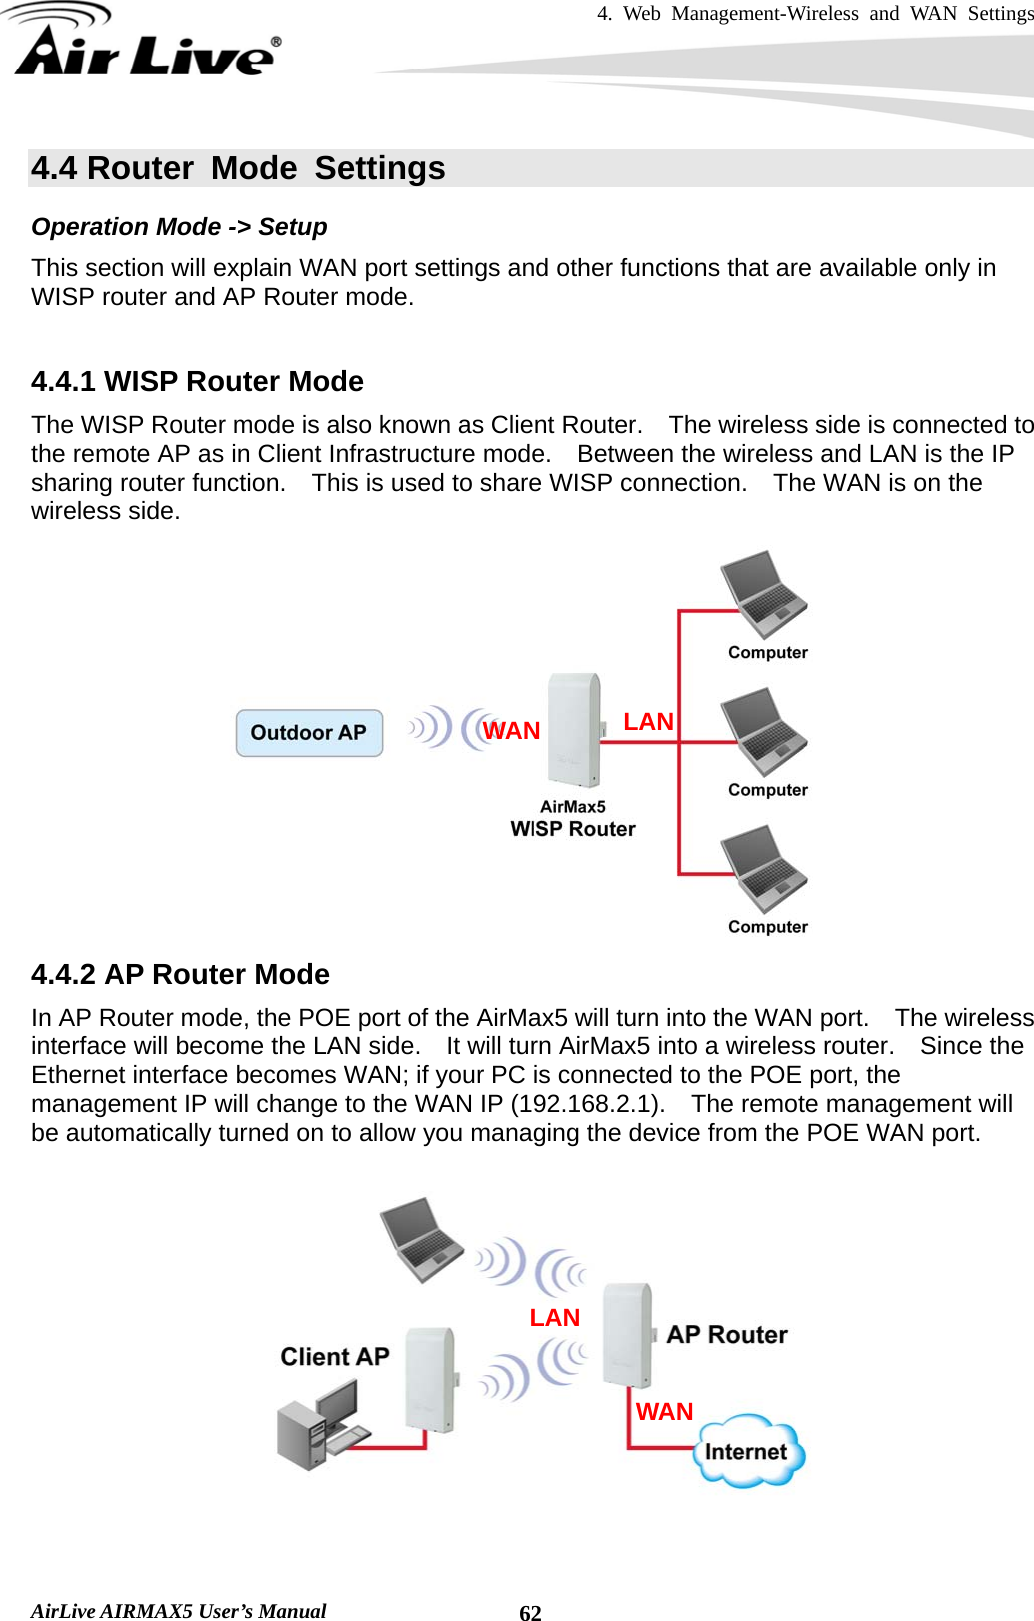 4. Web Management-Wireless and WAN Settings   AirLive AIRMAX5 User’s Manual  624.4 Router Mode Settings Operation Mode -&gt; Setup This section will explain WAN port settings and other functions that are available only in WISP router and AP Router mode.  4.4.1 WISP Router Mode The WISP Router mode is also known as Client Router.    The wireless side is connected to the remote AP as in Client Infrastructure mode.    Between the wireless and LAN is the IP sharing router function.    This is used to share WISP connection.    The WAN is on the wireless side.  4.4.2 AP Router Mode In AP Router mode, the POE port of the AirMax5 will turn into the WAN port.    The wireless interface will become the LAN side.    It will turn AirMax5 into a wireless router.    Since the Ethernet interface becomes WAN; if your PC is connected to the POE port, the management IP will change to the WAN IP (192.168.2.1).    The remote management will be automatically turned on to allow you managing the device from the POE WAN port.  WAN  LAN WAN LAN 